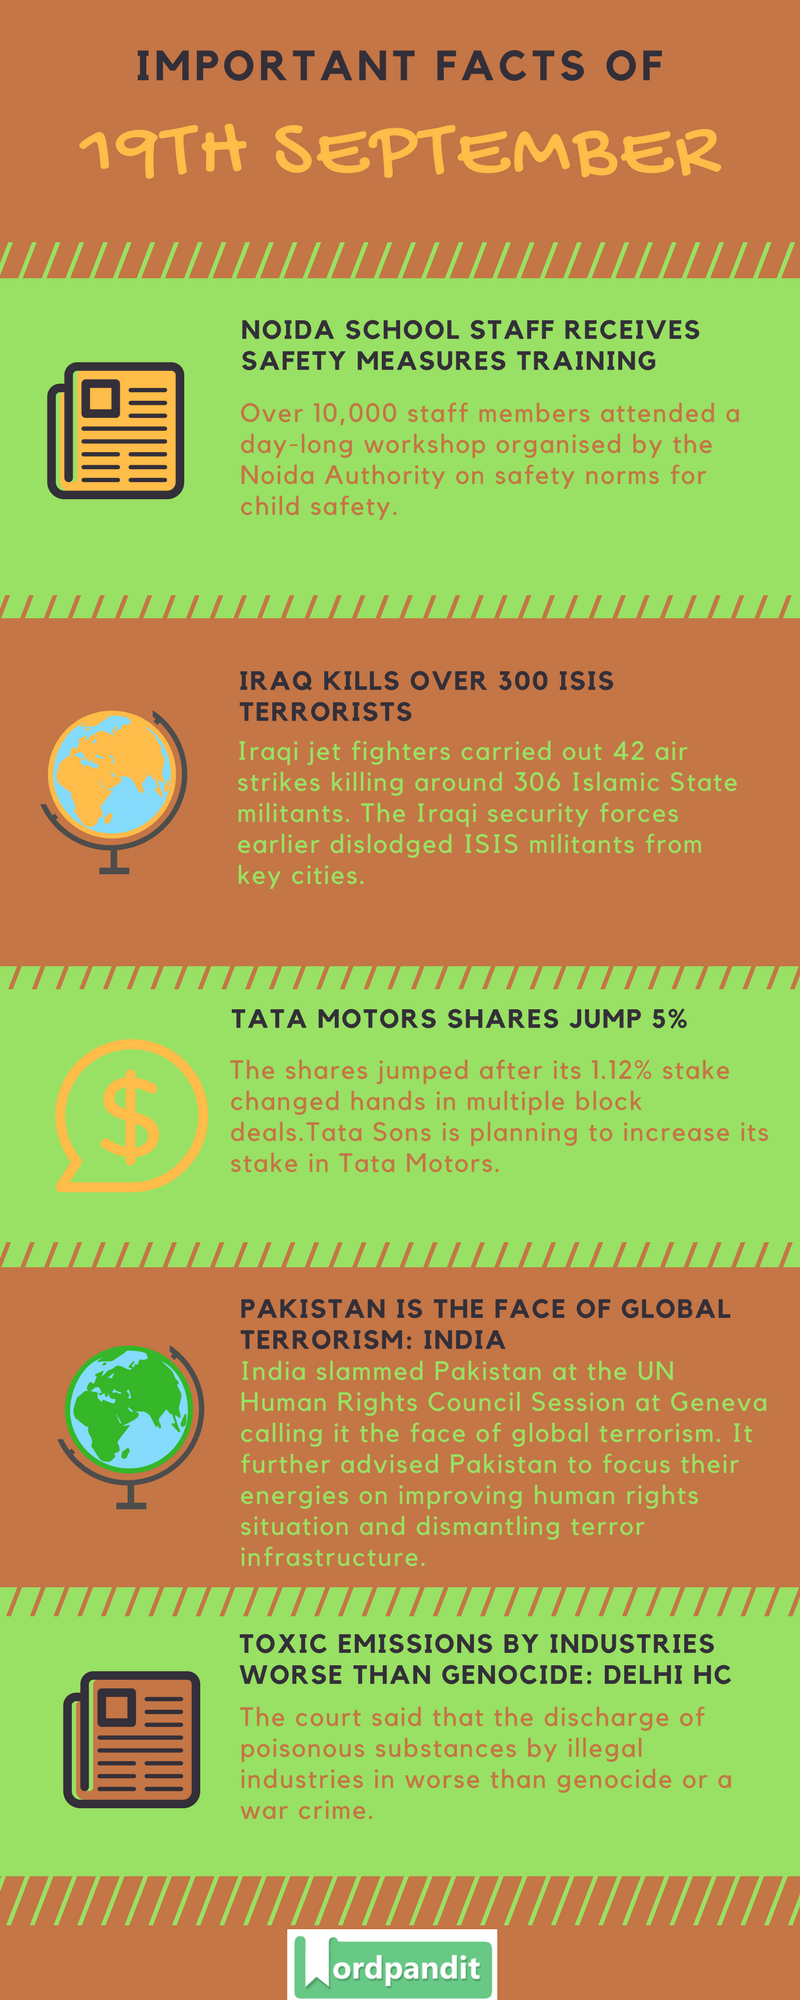 Daily-Current-Affairs-19-september-2017-Current-Affairs-Quiz-september-19-2017-Current-Affairs-Infographic